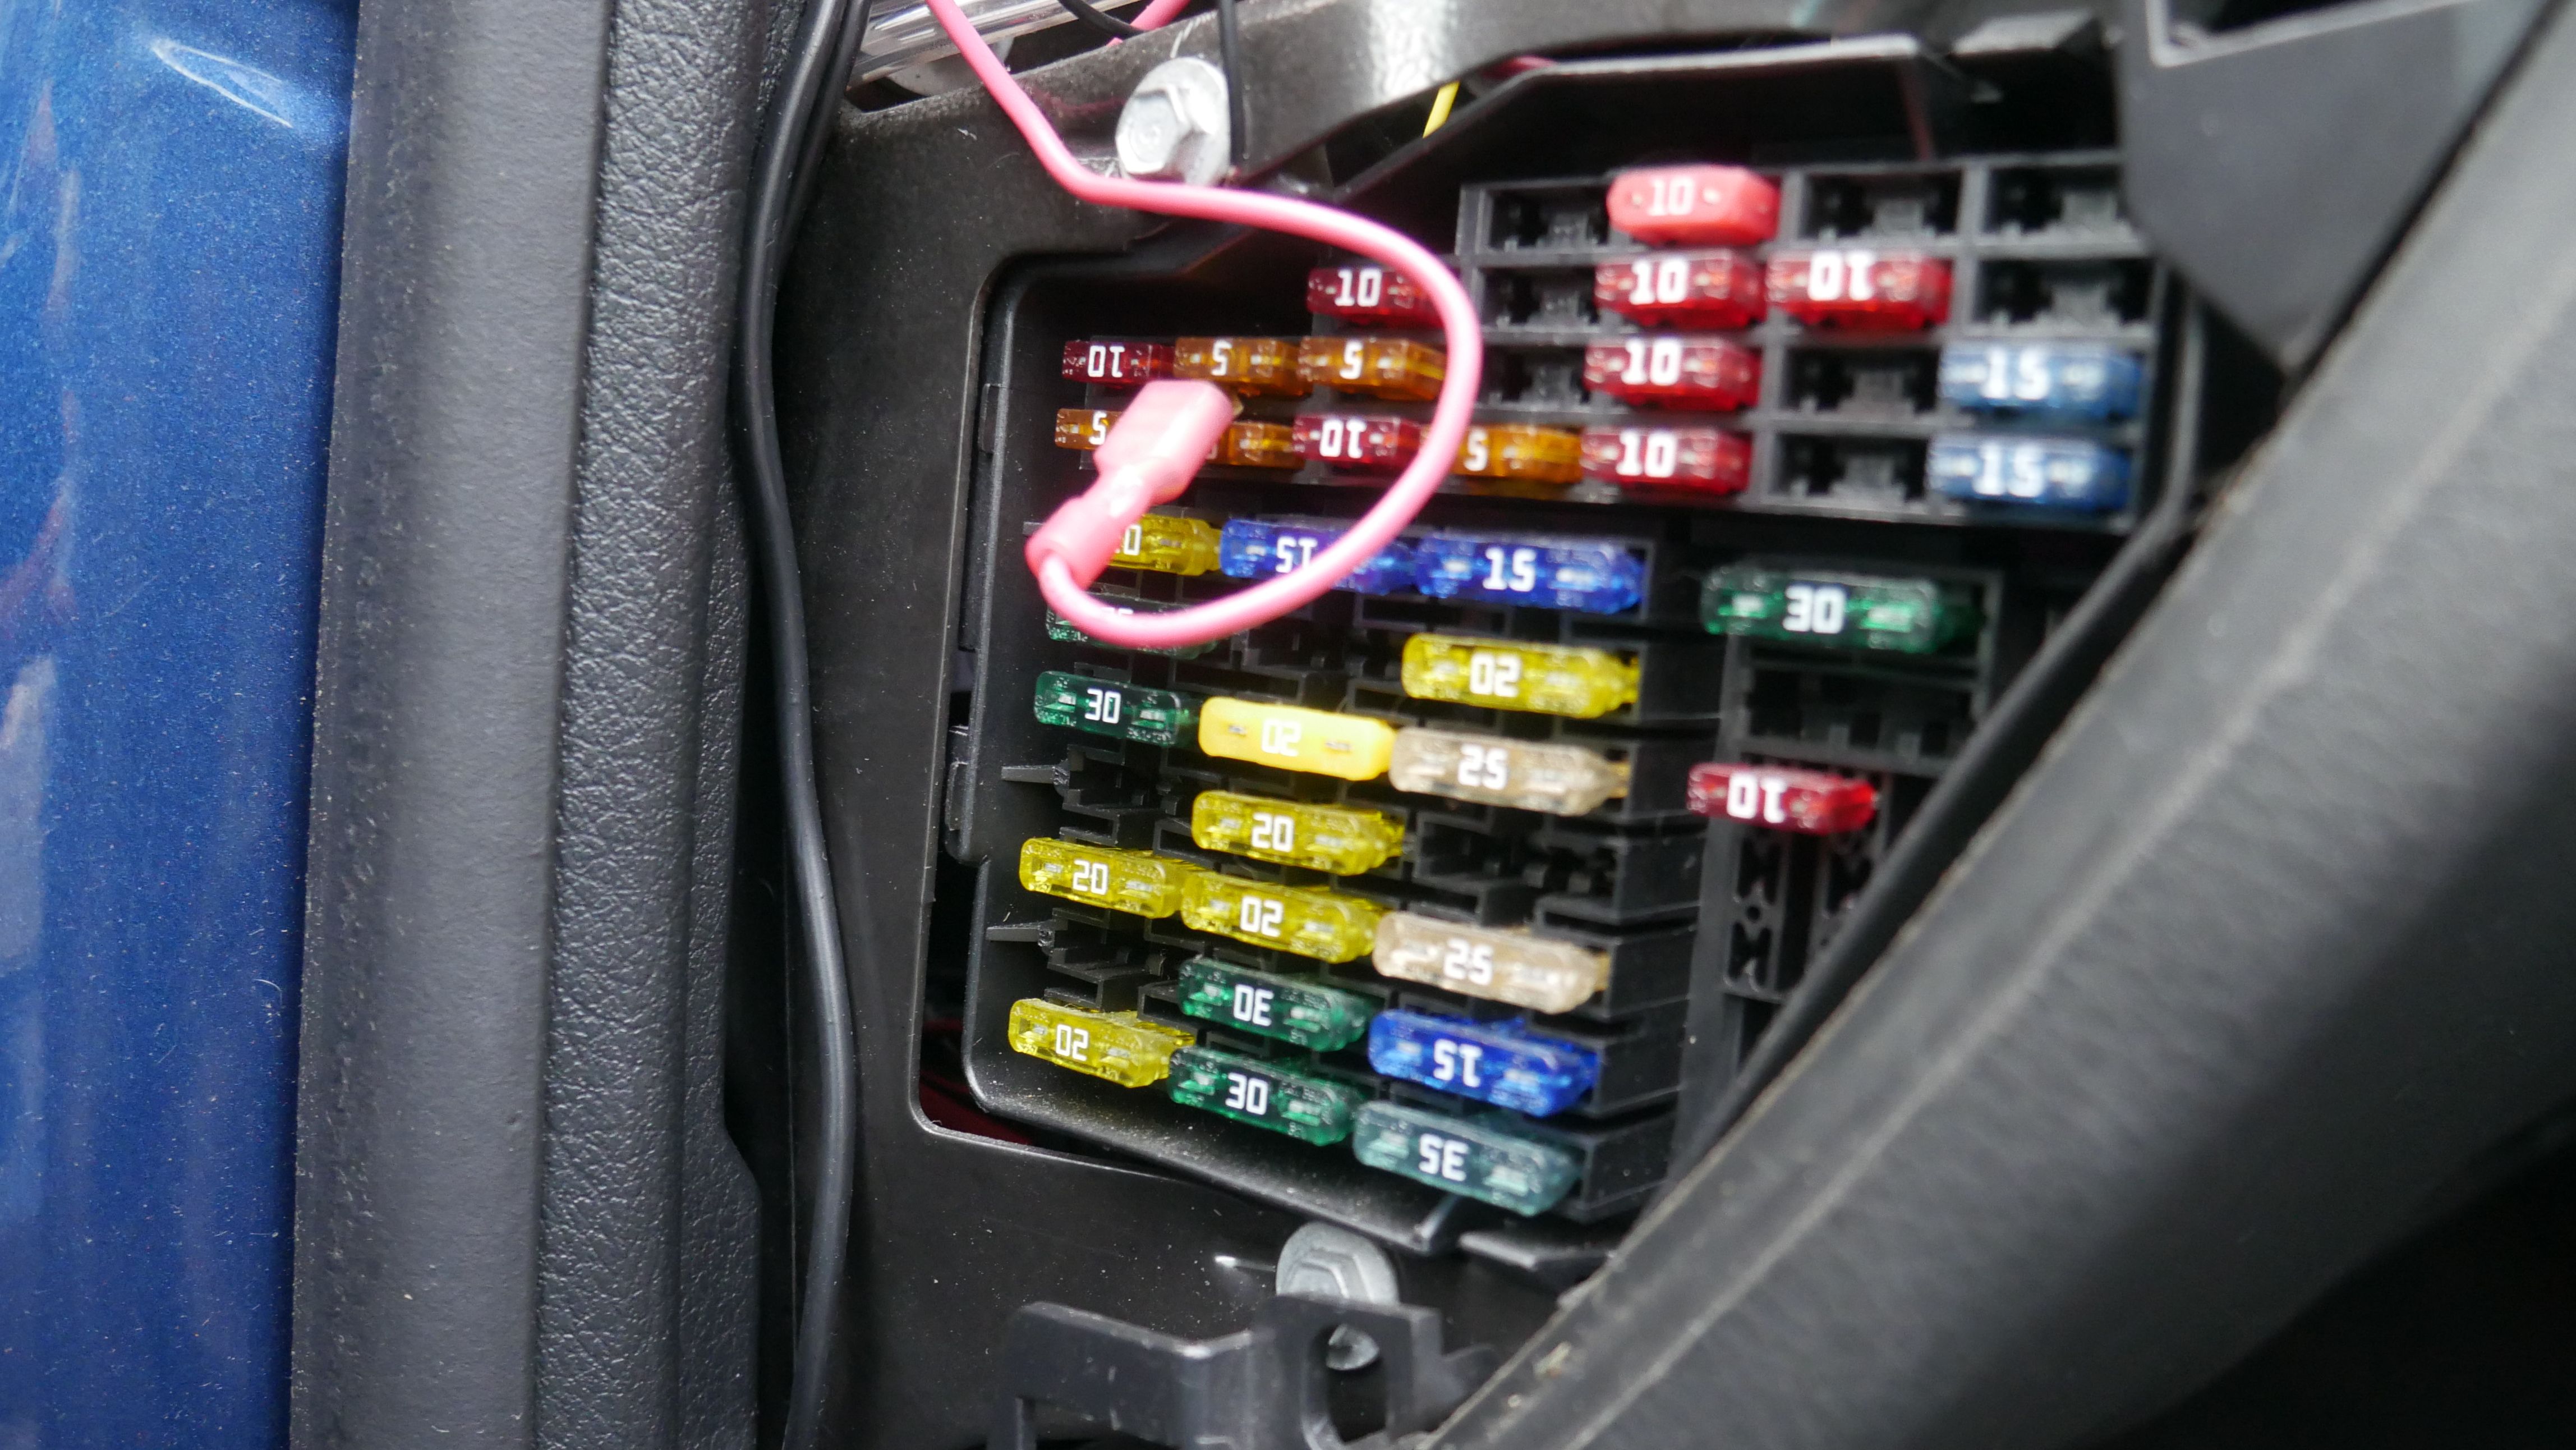 Image of Audi A4 fuse panel with fuse tap installed